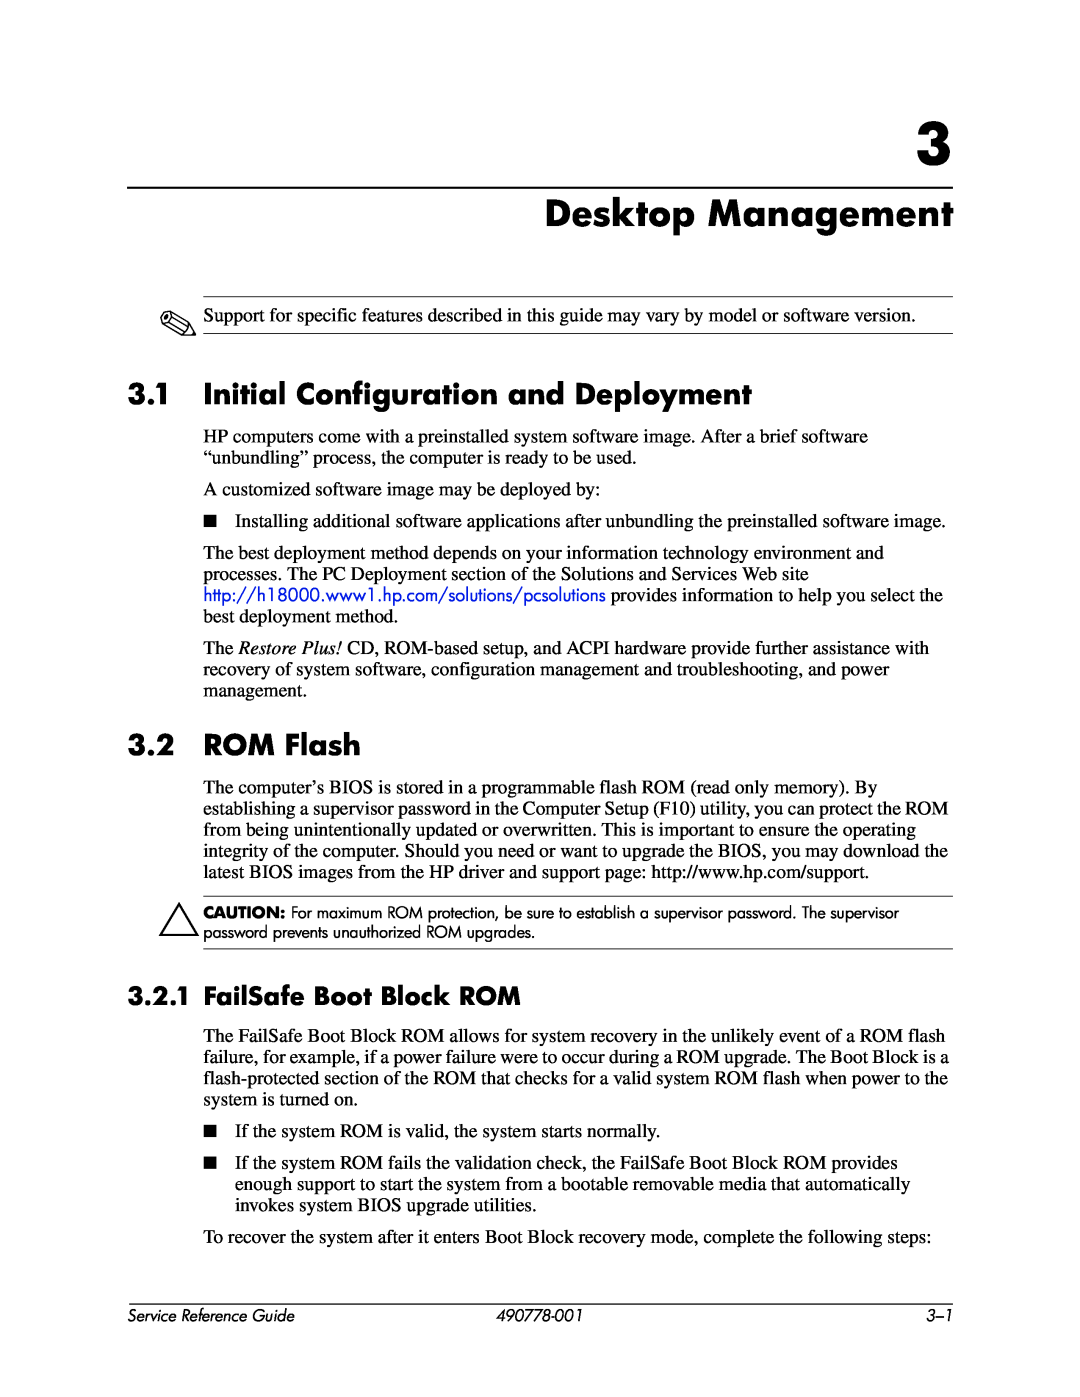 HP dx2310 manual Desktop Management, Initial Configuration and Deployment, ROM Flash, FailSafe Boot Block ROM 